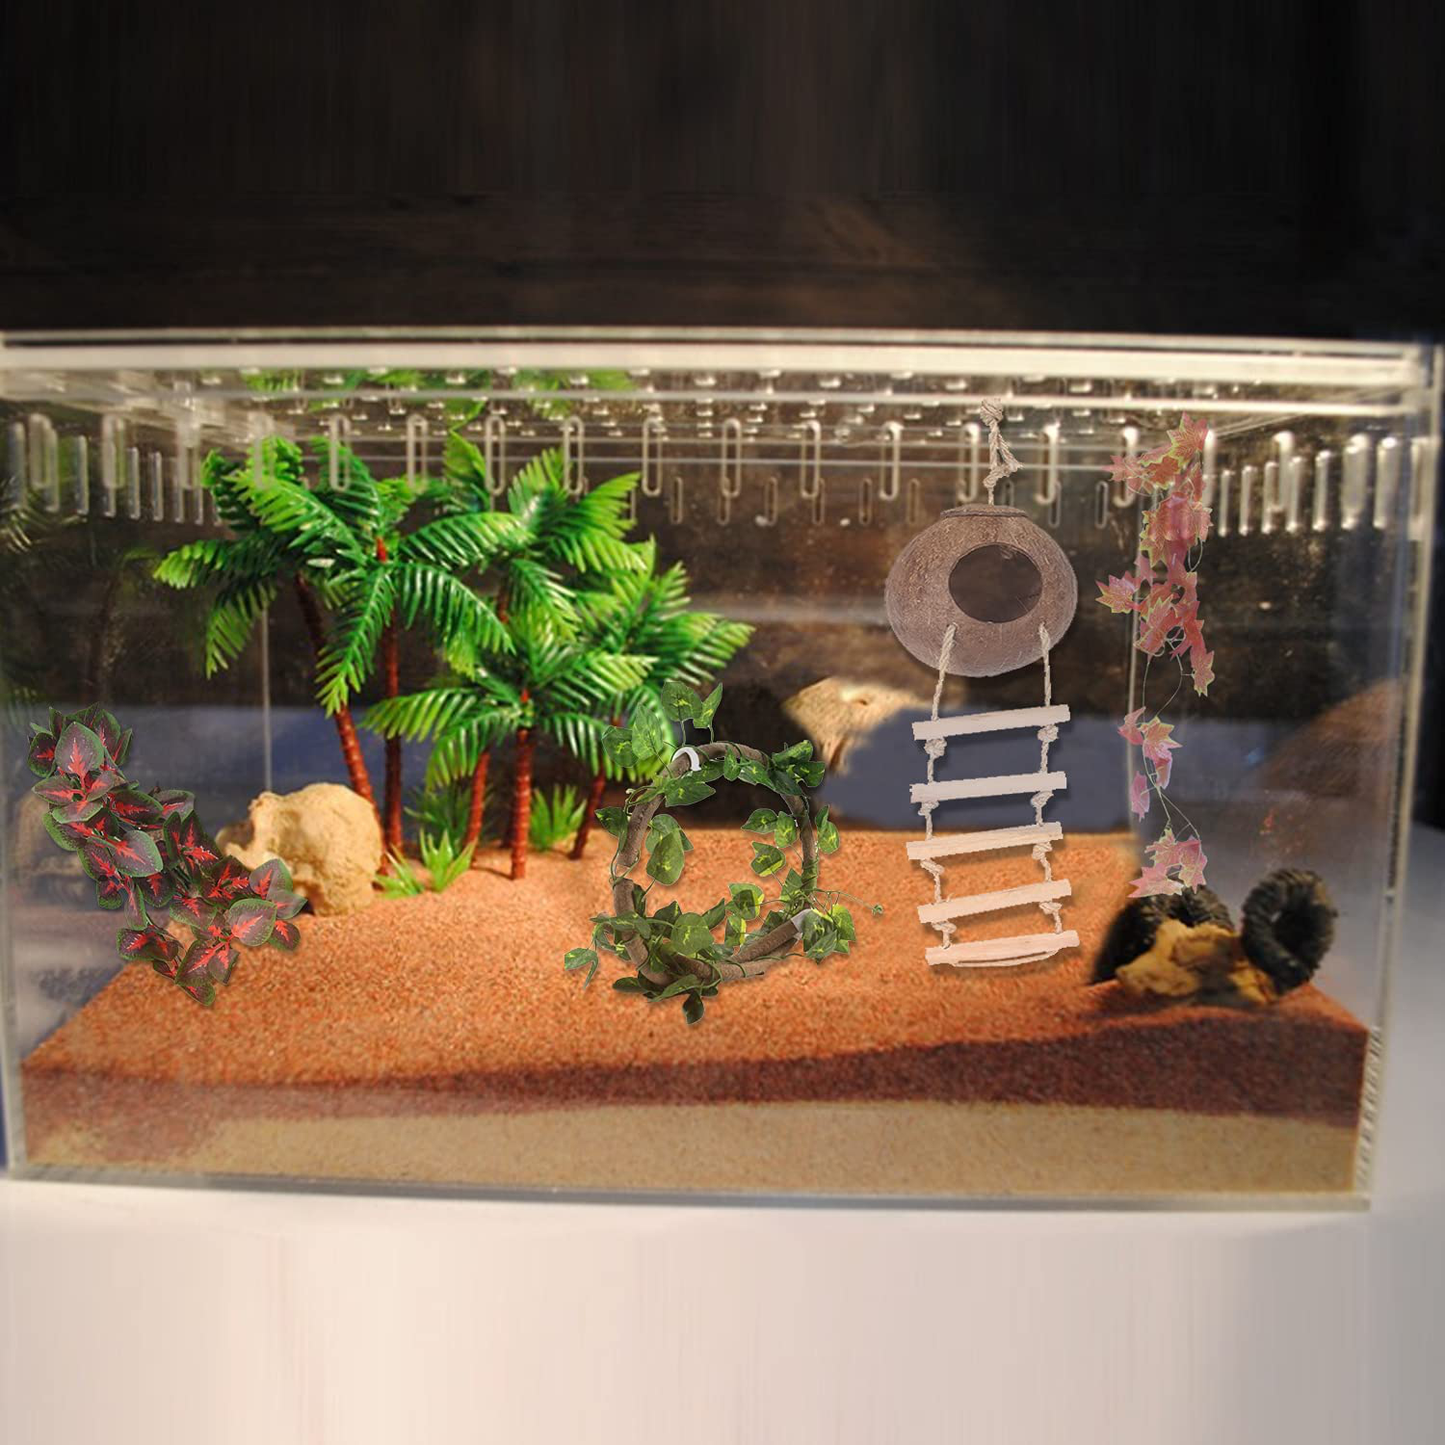 HERCOCCI Leopard Gecko Tank Accessories, Coconut Shell Ladder Hideout Hole Reptile Climbing Vine Habitat Decor with 3 Pieces Colorful Plastic Plants for Chameleon Lizard Snake Hermit Crab Animals & Pet Supplies > Pet Supplies > Reptile & Amphibian Supplies > Reptile & Amphibian Habitat Accessories HERCOCCI   